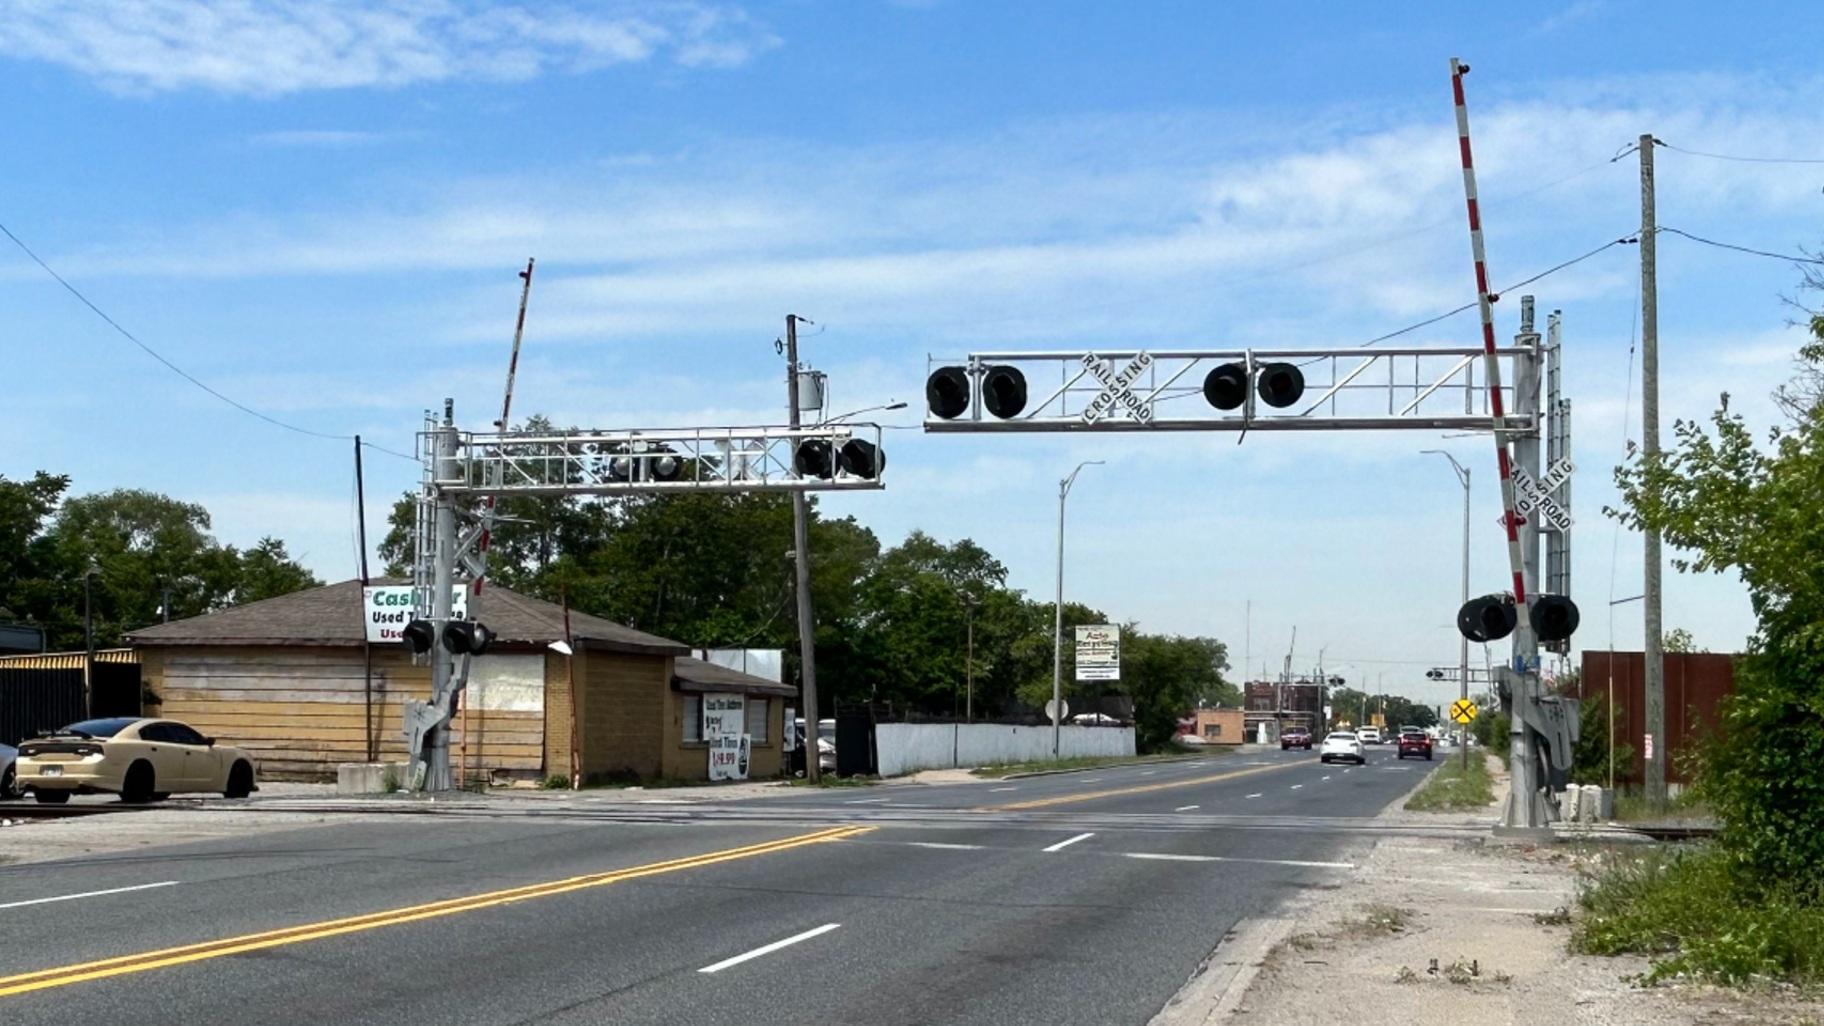 This Harvey railroad crossing, located on Sibley Boulevard west of Ashland Avenue, has the fourth most complaints of any crossing in the state. (Jared Rutecki / WTTW News)